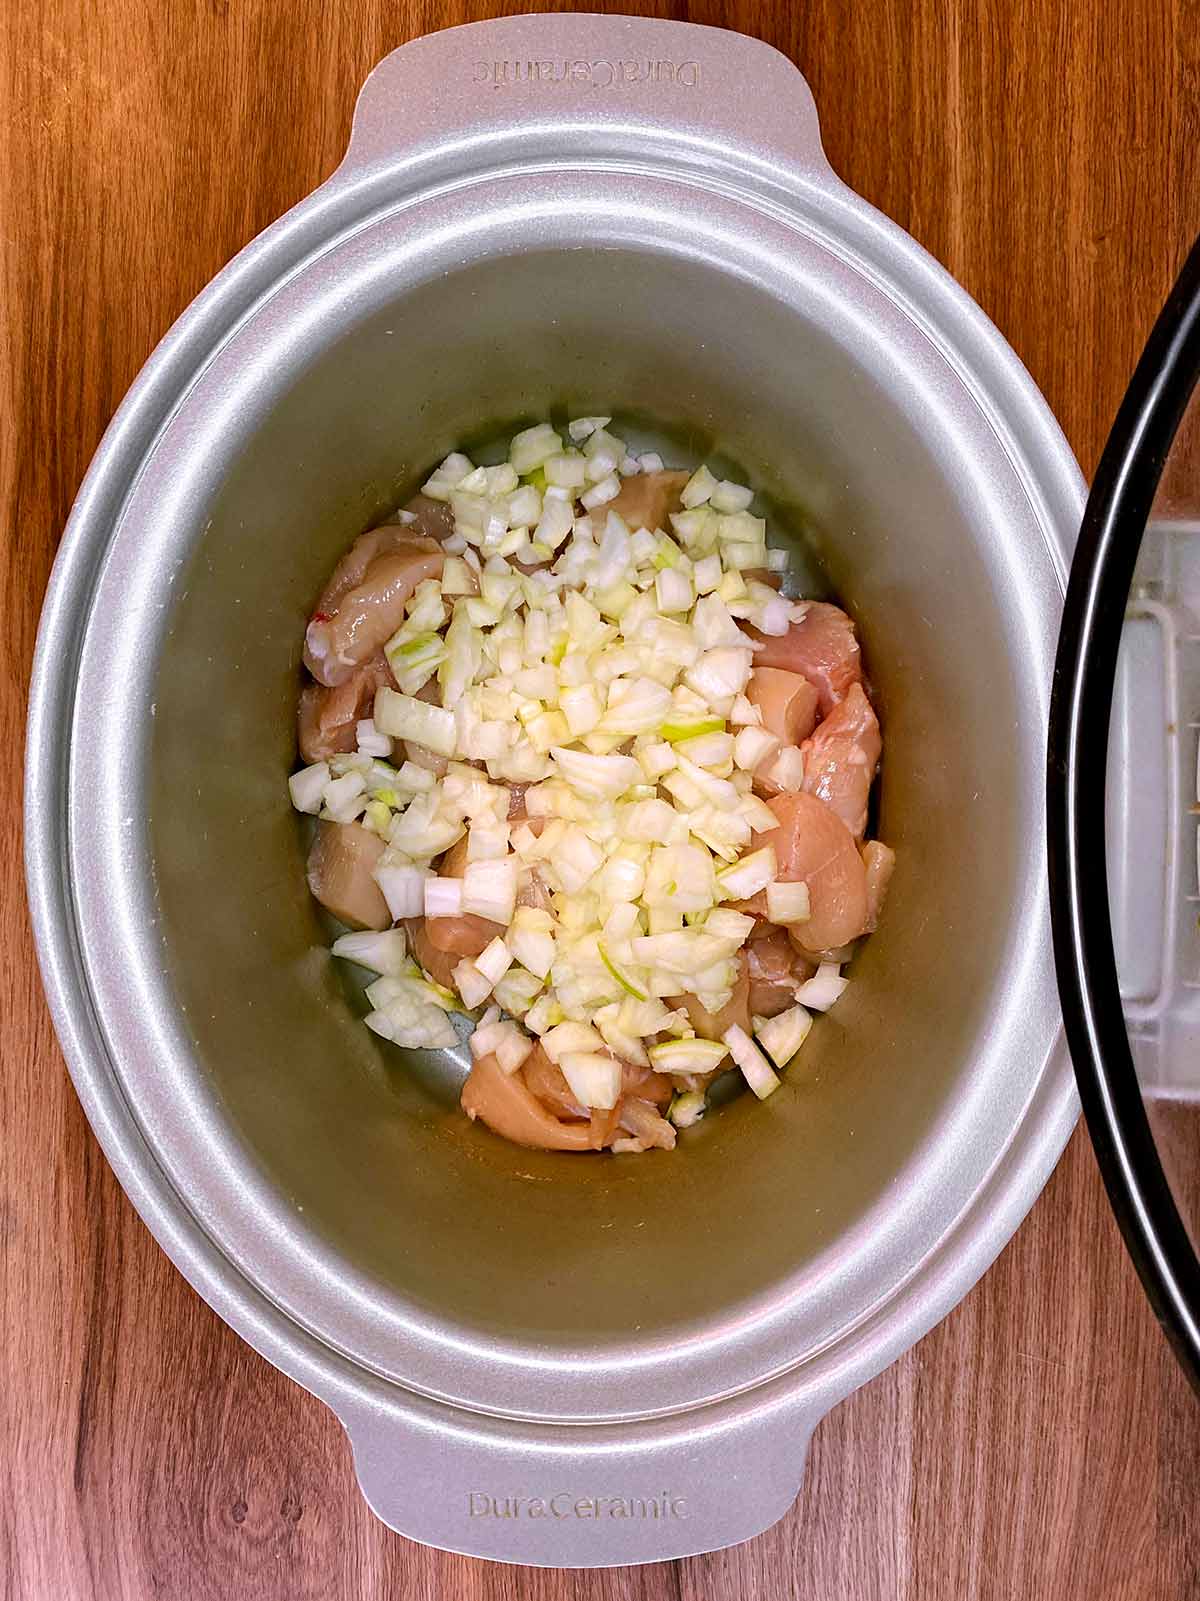 Chopped chicken breast and chopped onion in a slow cooker.